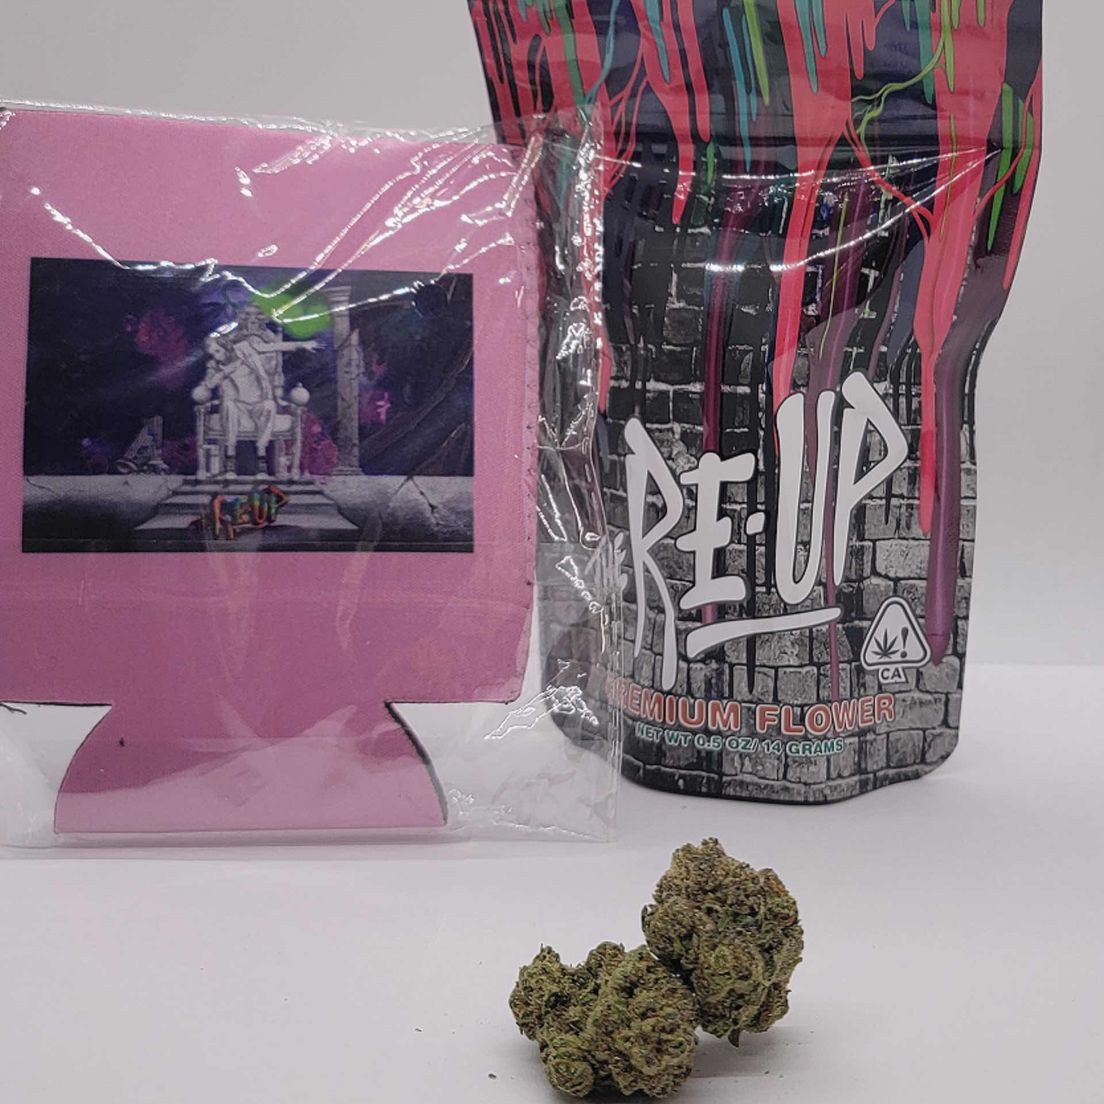 *Deal! $75 1/2 oz. Cold Heat (32.07%/Indica) - The Re-Up + Beverage Cozy